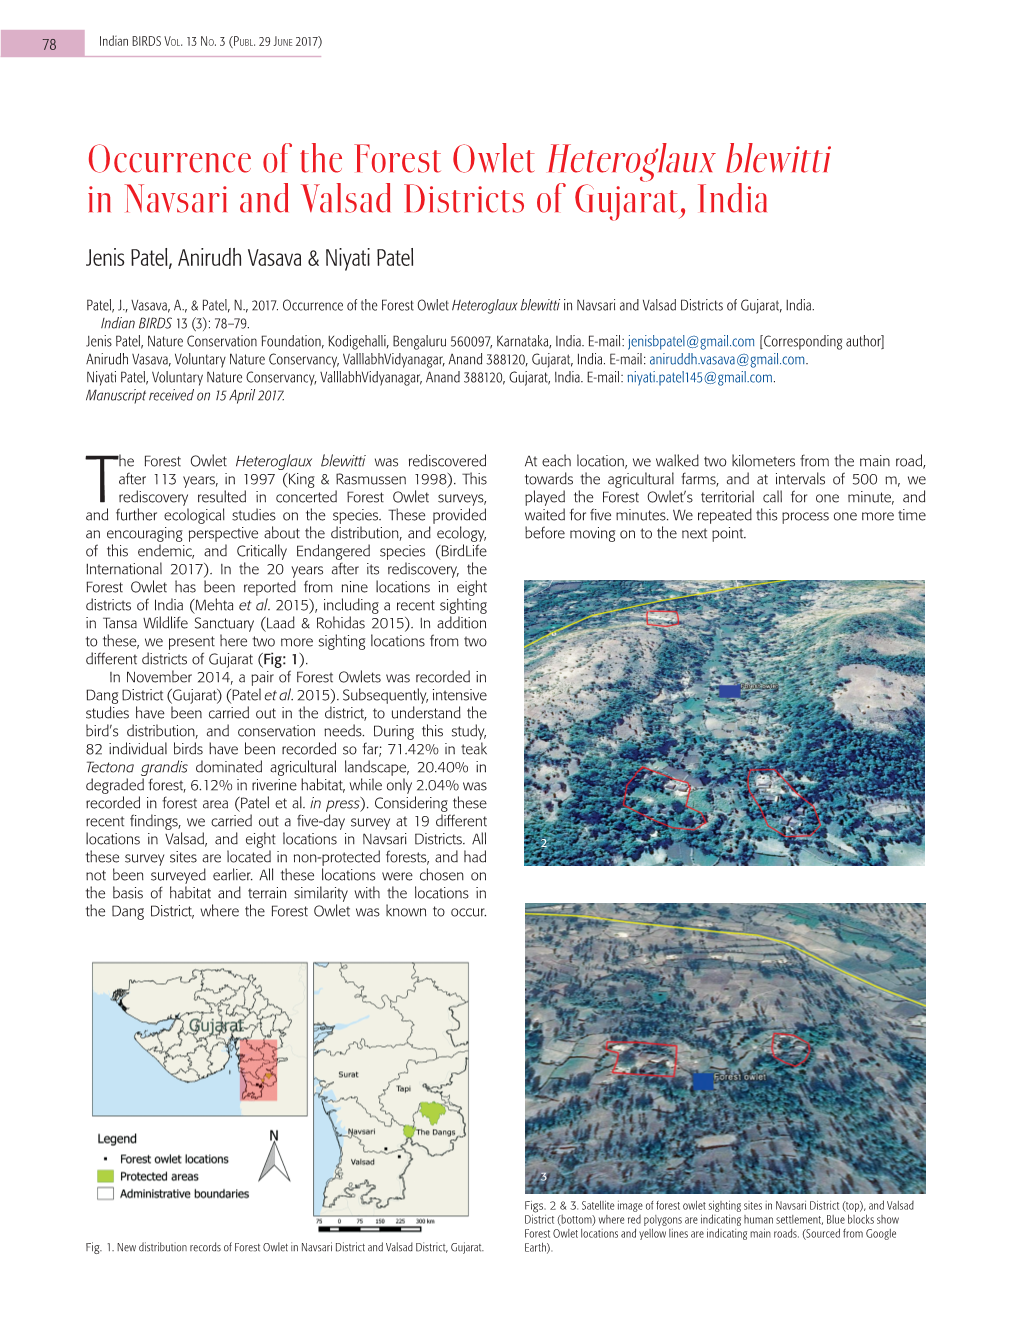 Occurrence of the Forest Owlet Heteroglaux Blewitti in Navsari and Valsad Districts of Gujarat, India